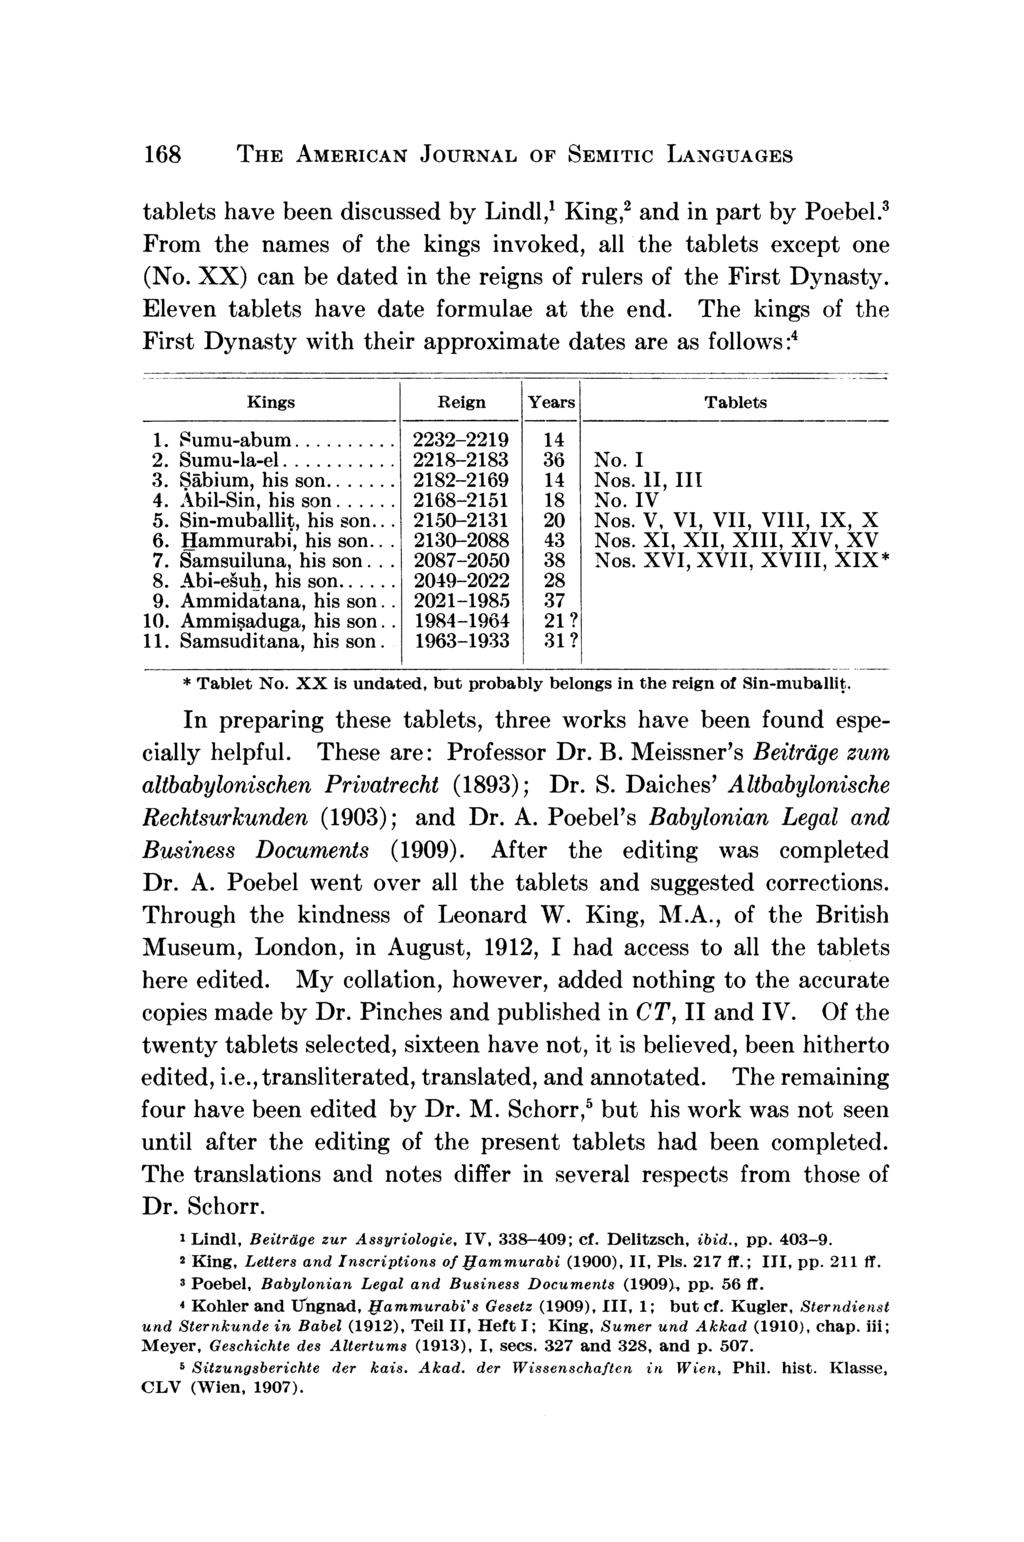 168 THE AMERICAN JOURNAL OF SEMITIC LANGUAGES tablets have been discussed by Lindl,1 King,2 and in part by Poebel.3 From the names of the kings invoked, all the tablets except one (No.